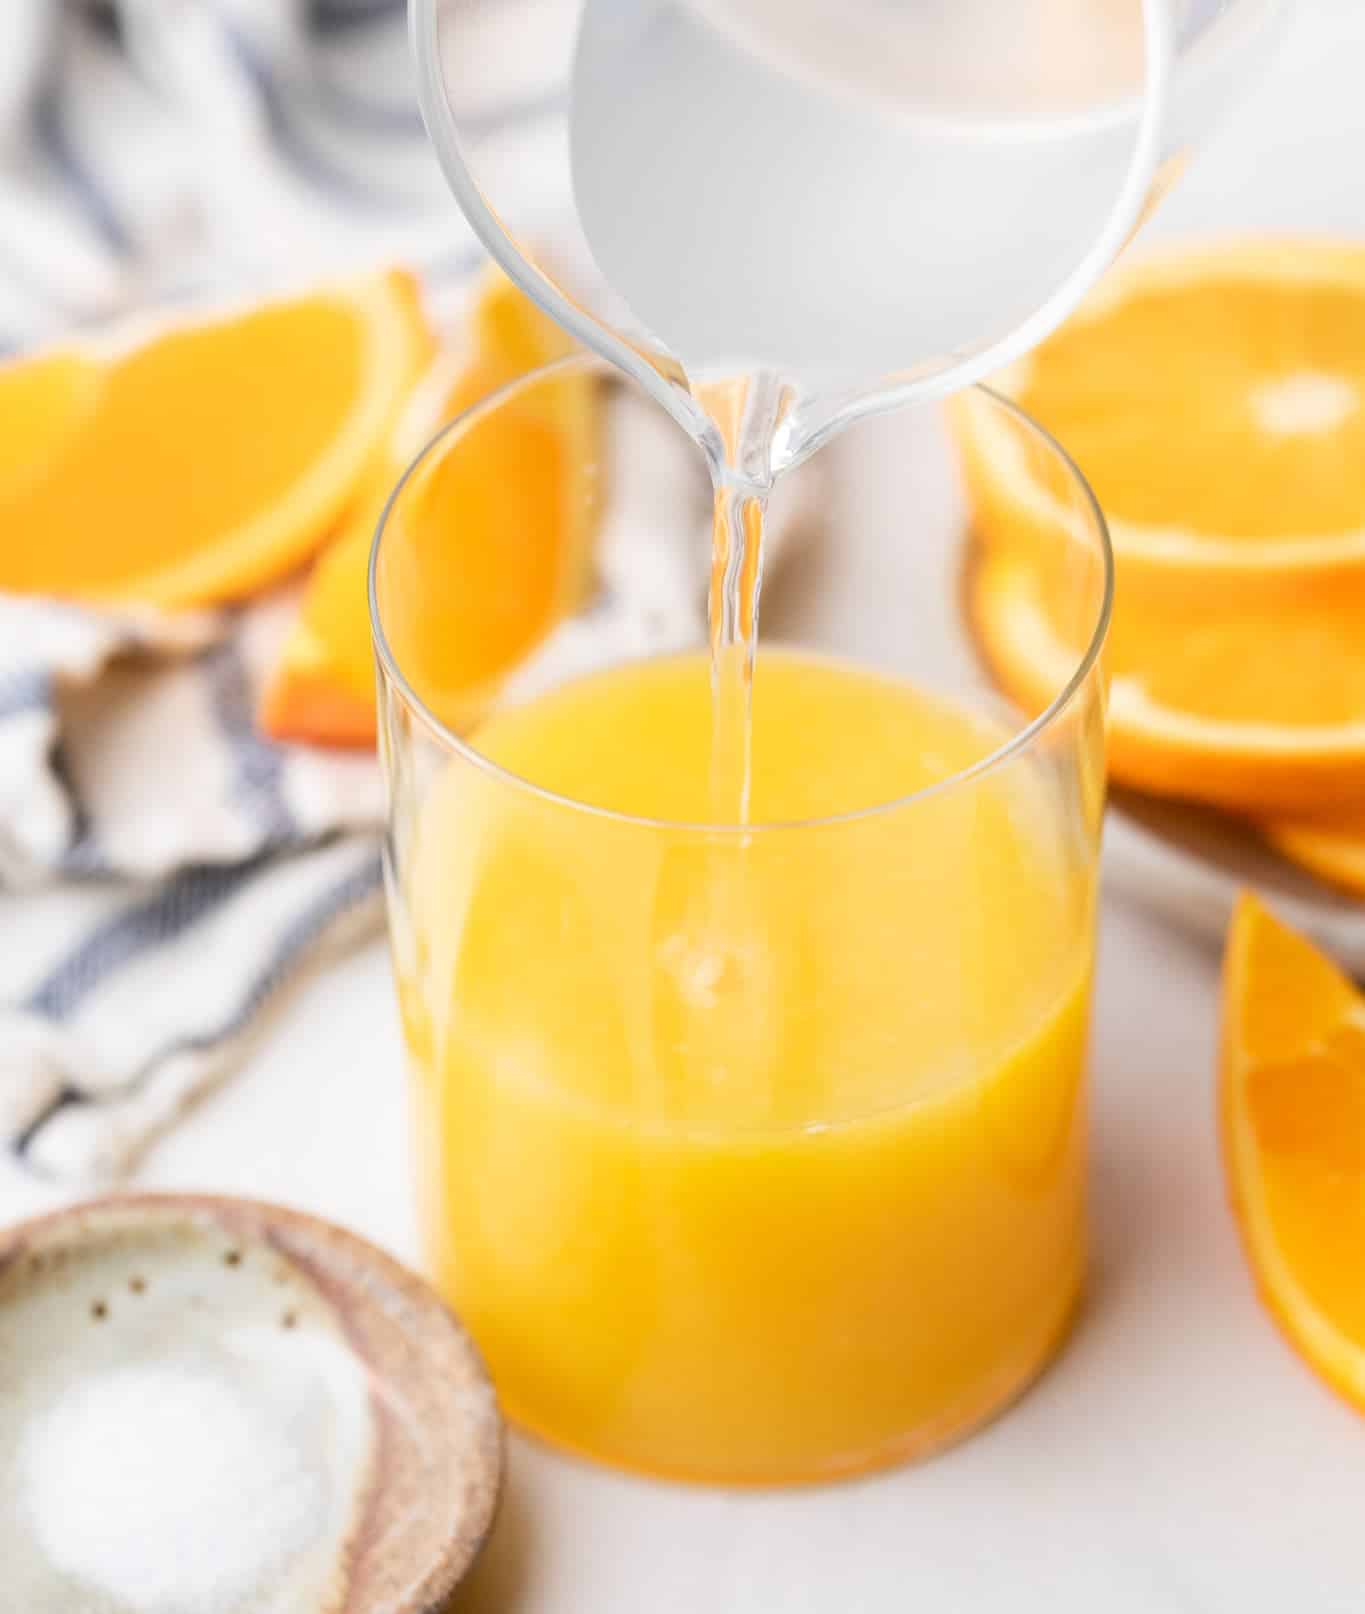 Adding coconut water and orange juice together in a small glass.